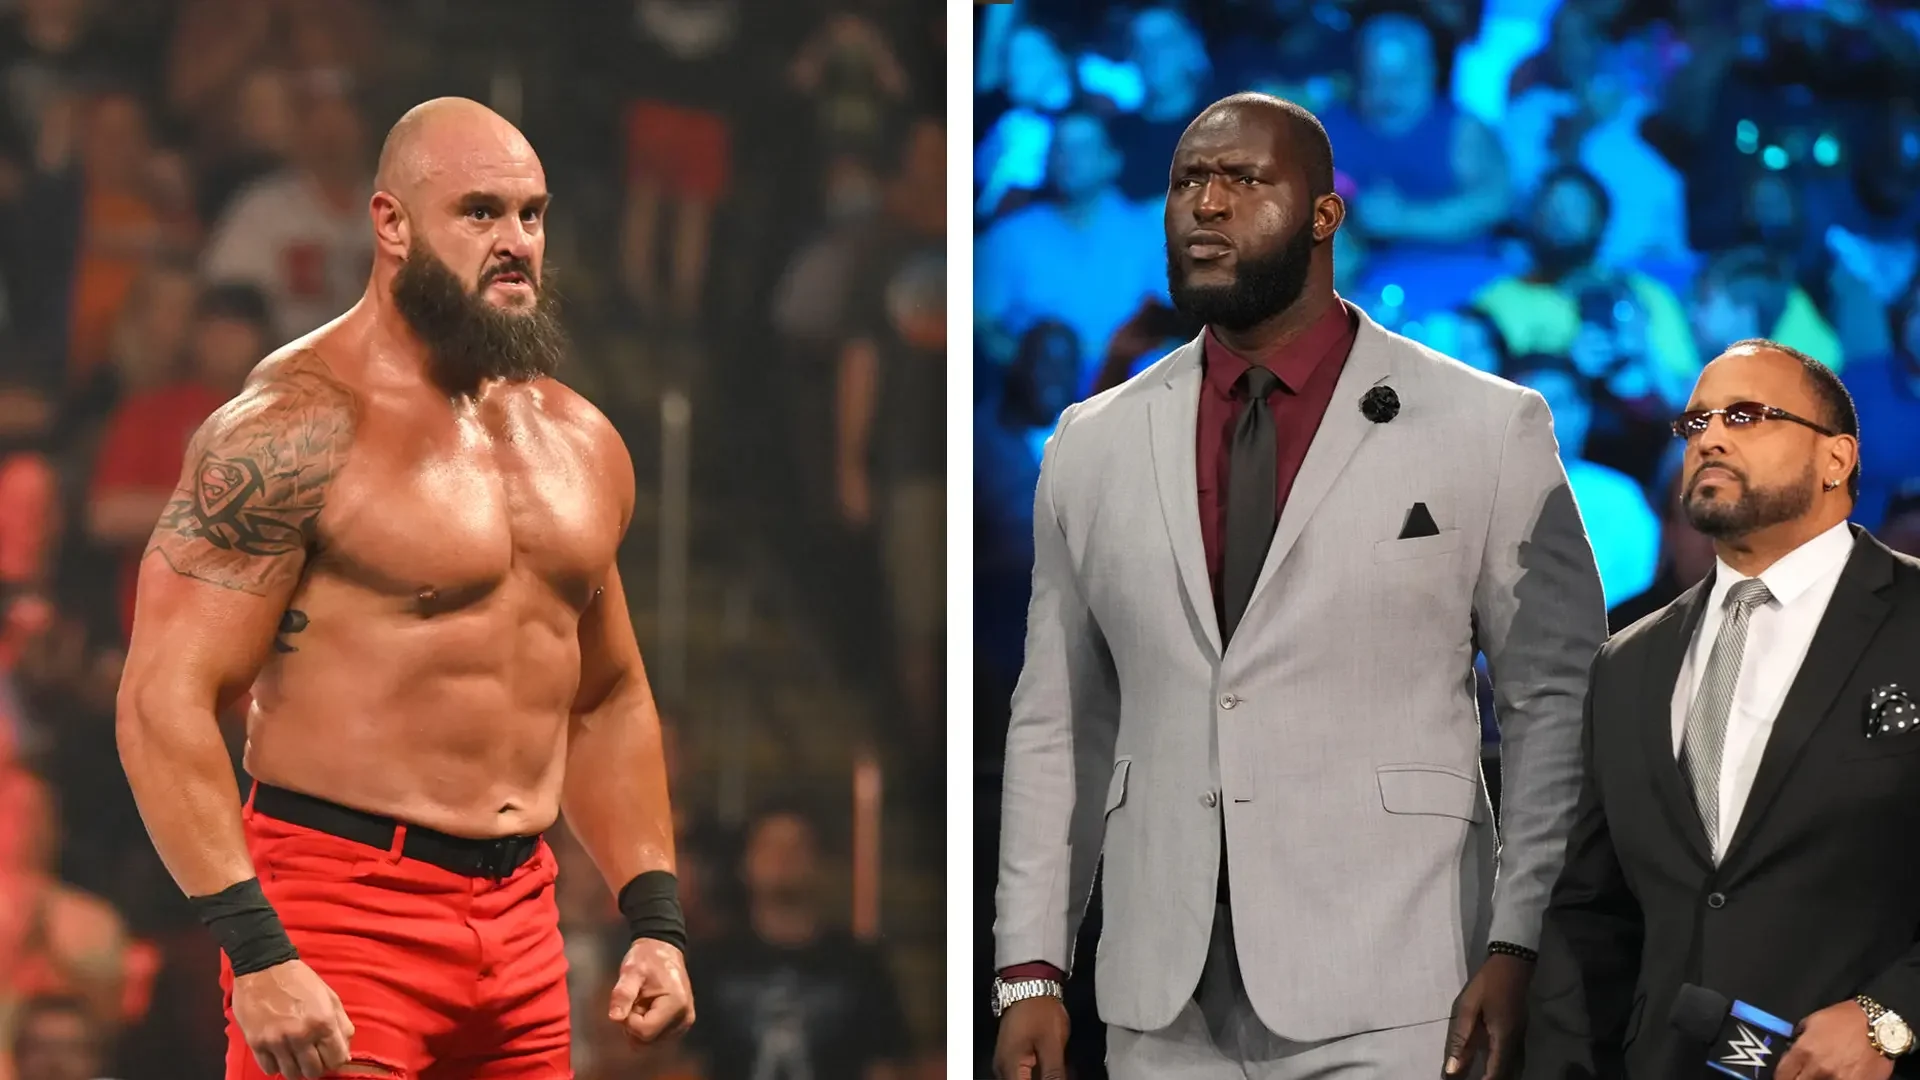 Braun Strowman vs. Omos Reportedly Scheduled For WWE Crown Jewel